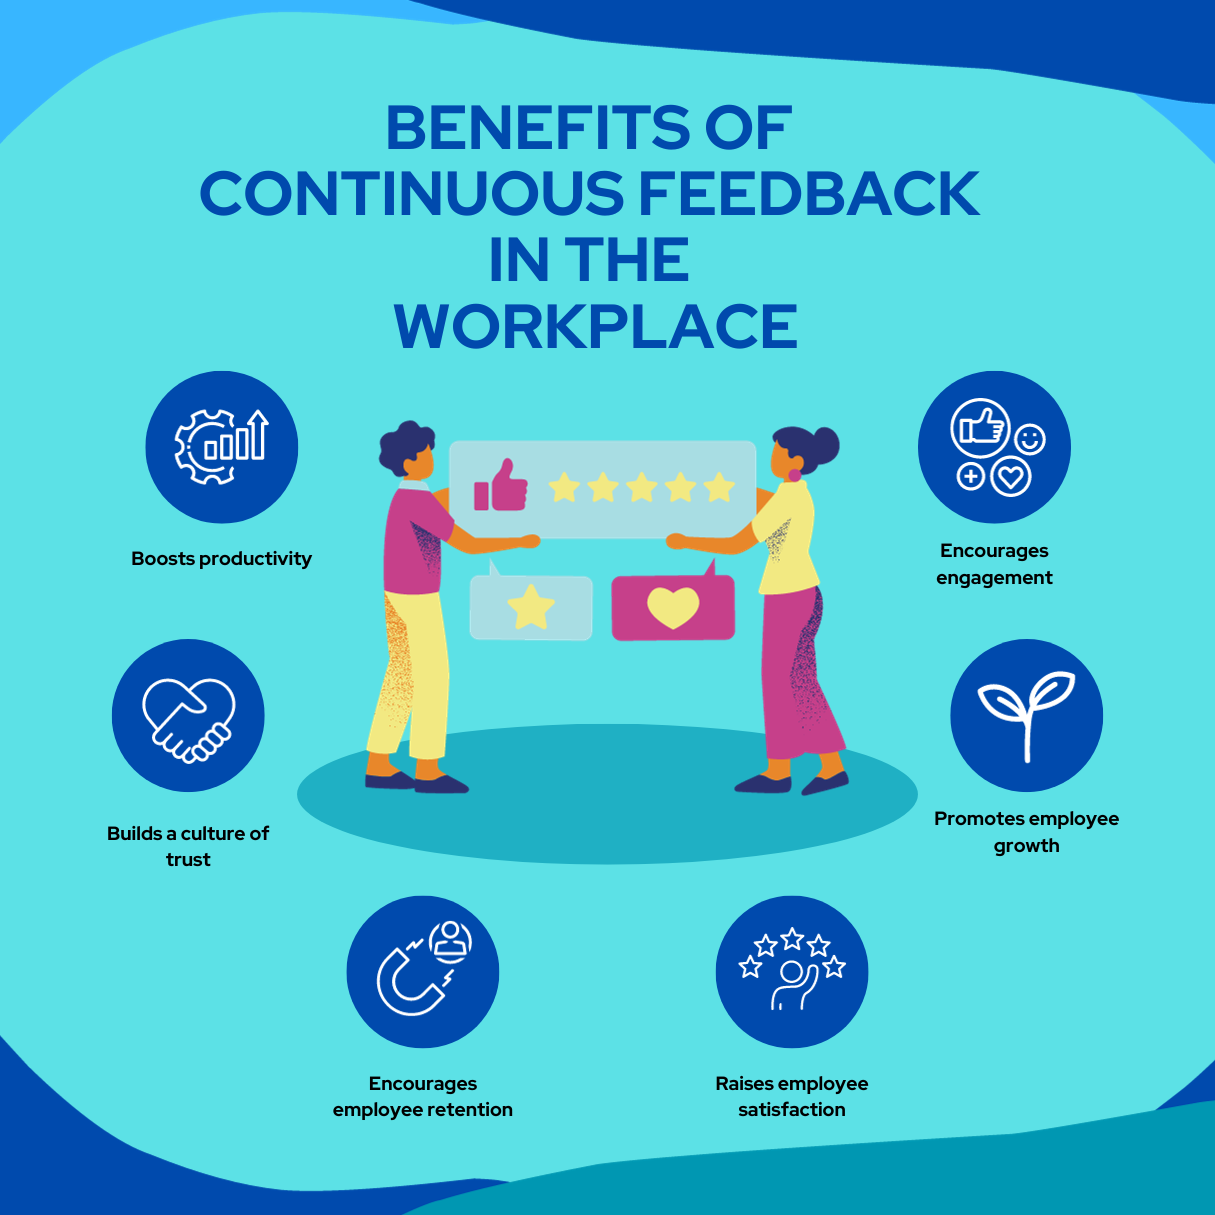 Benefits of continuous feedback